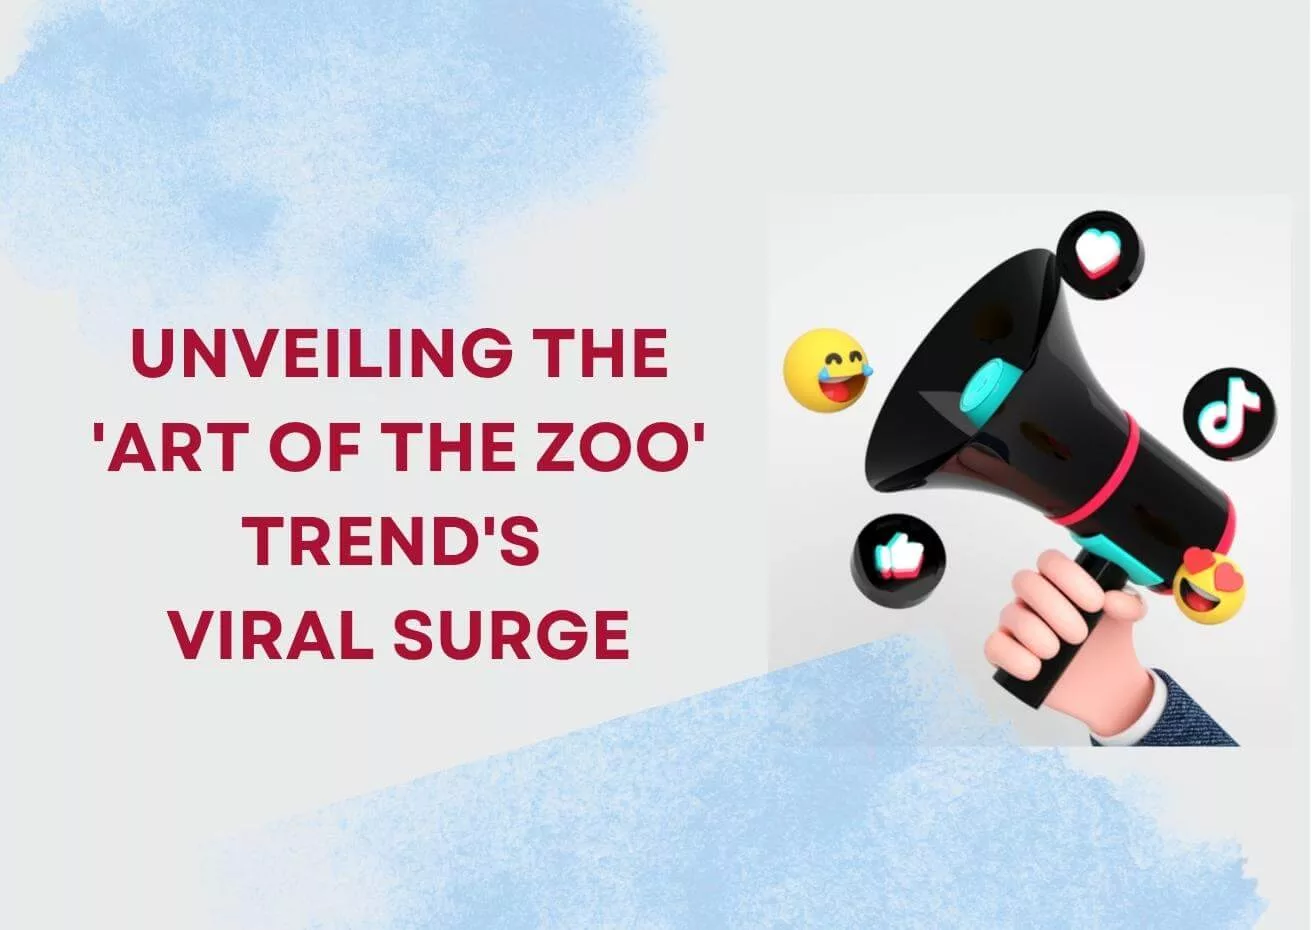 Unveiling the 'Art of the Zoo' Trend's Viral Surge